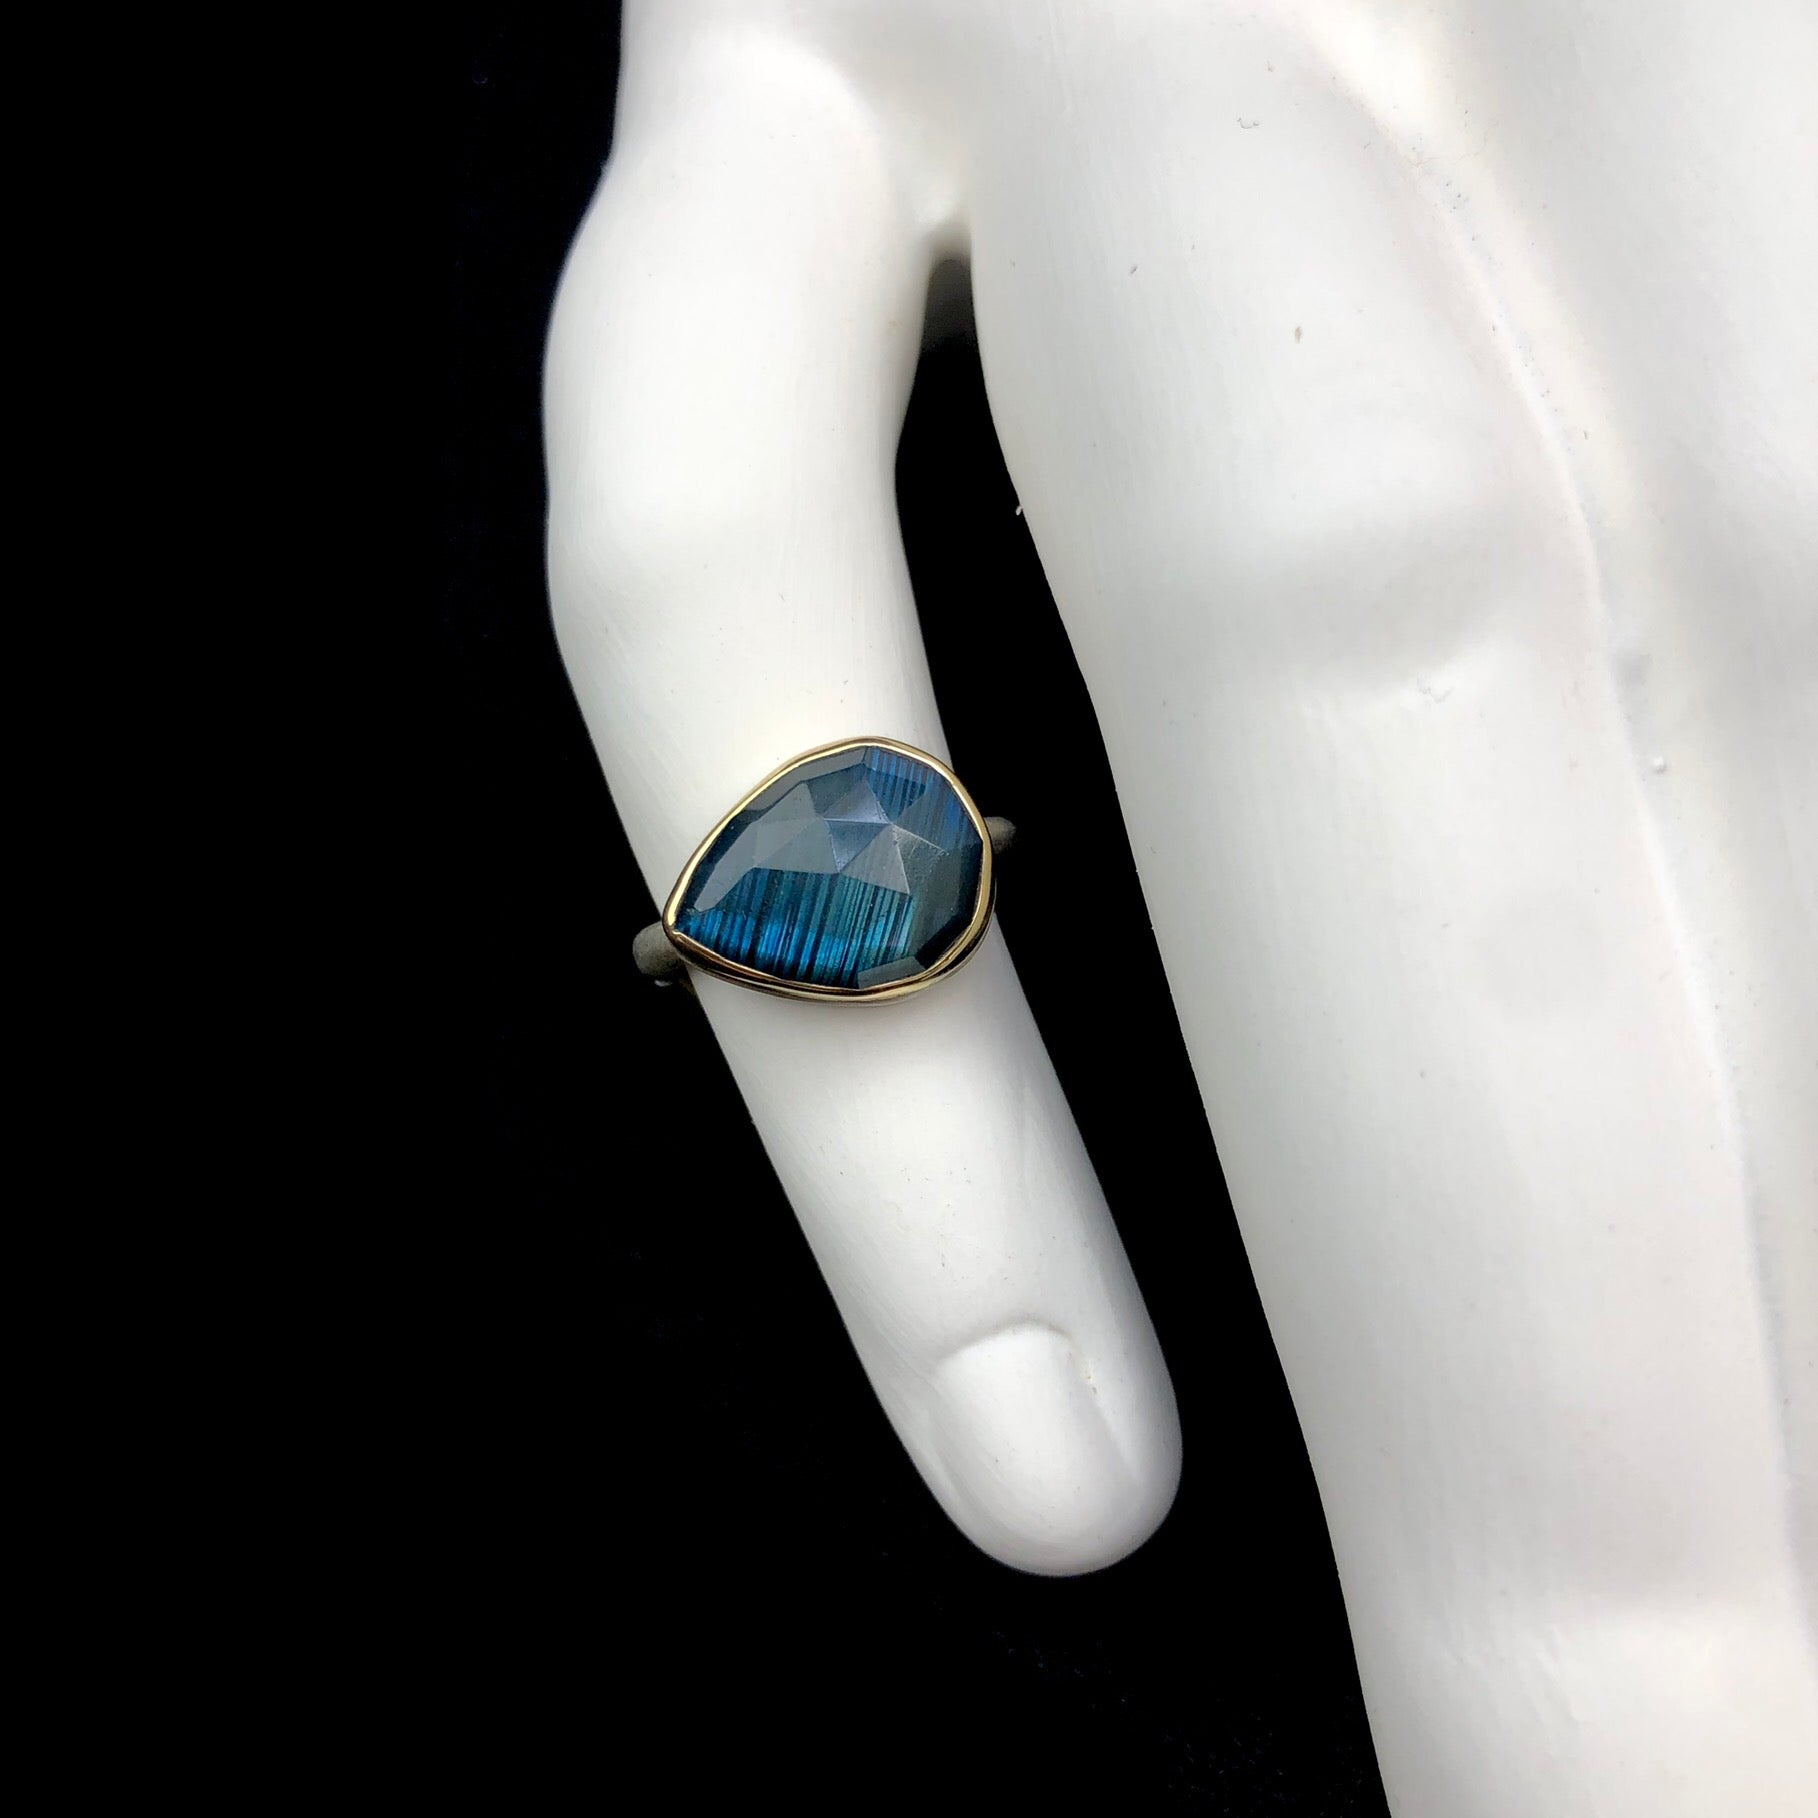 Teardrop shaped blue/green iridescent stone ring with gold setting shown on white ceramic finger